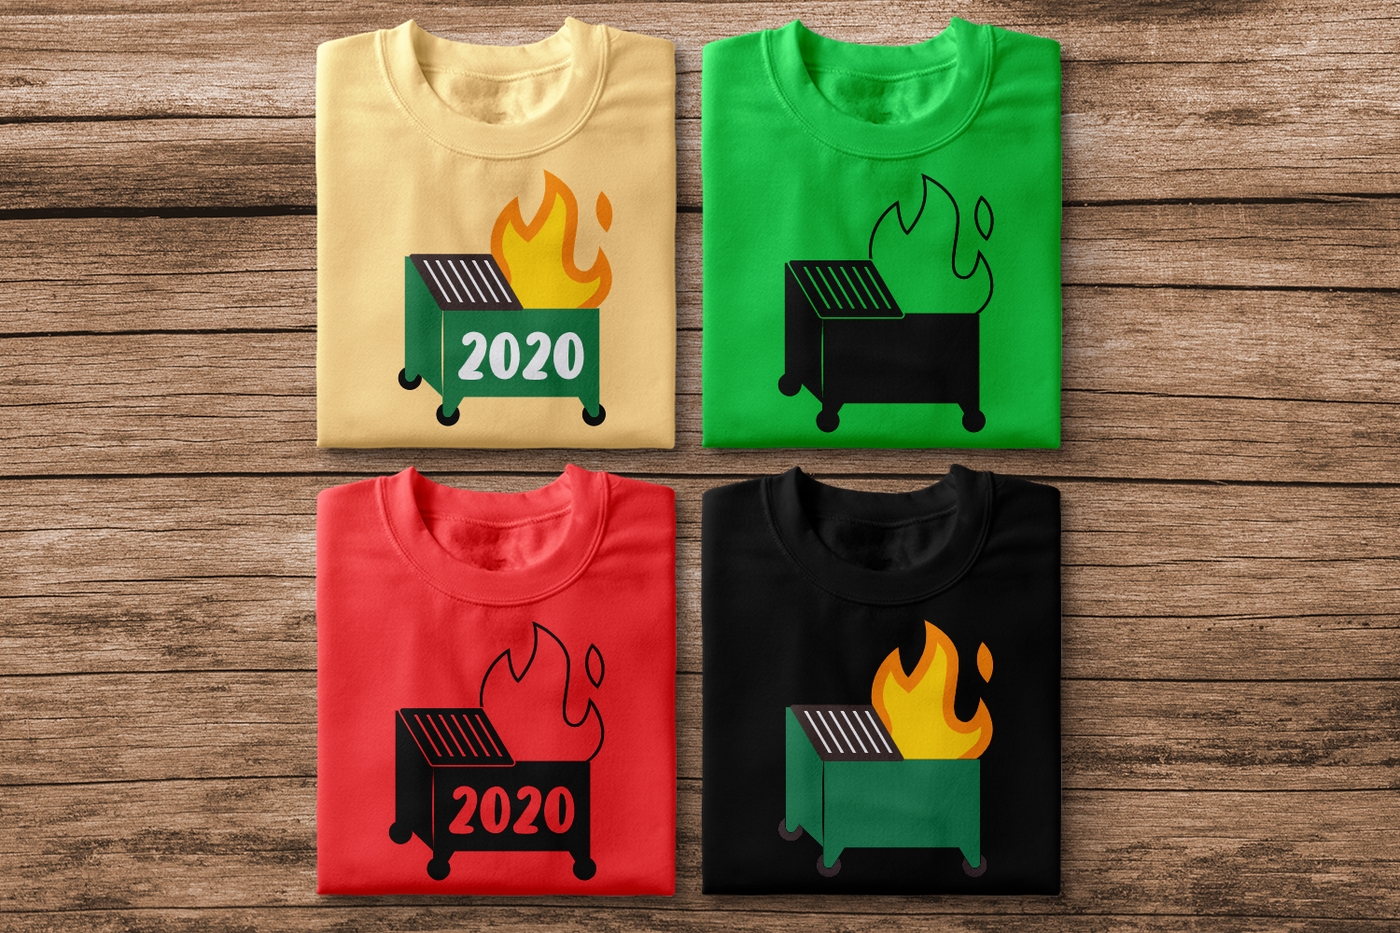 Four folded shirts, each with a dumpster fire design. Some say "2020" on the dumpster. Single color and multi-color versions are represented.